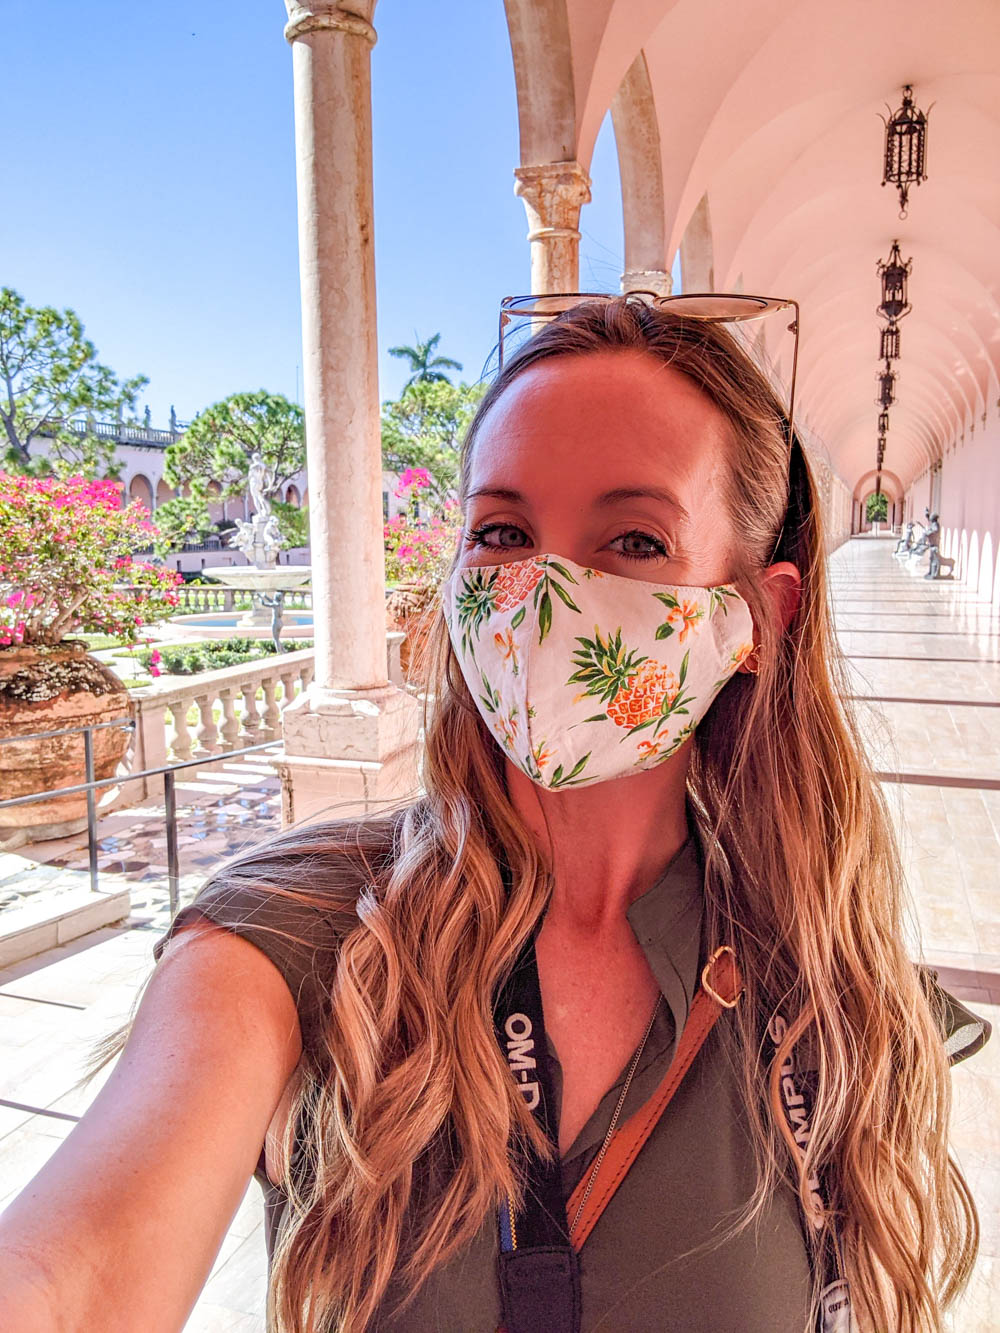 Cloth face masks | Must-Have Travel Safety Items: 17 Essentials for Your Travel Safety Kit | Travel health and safety | solo female travel safety